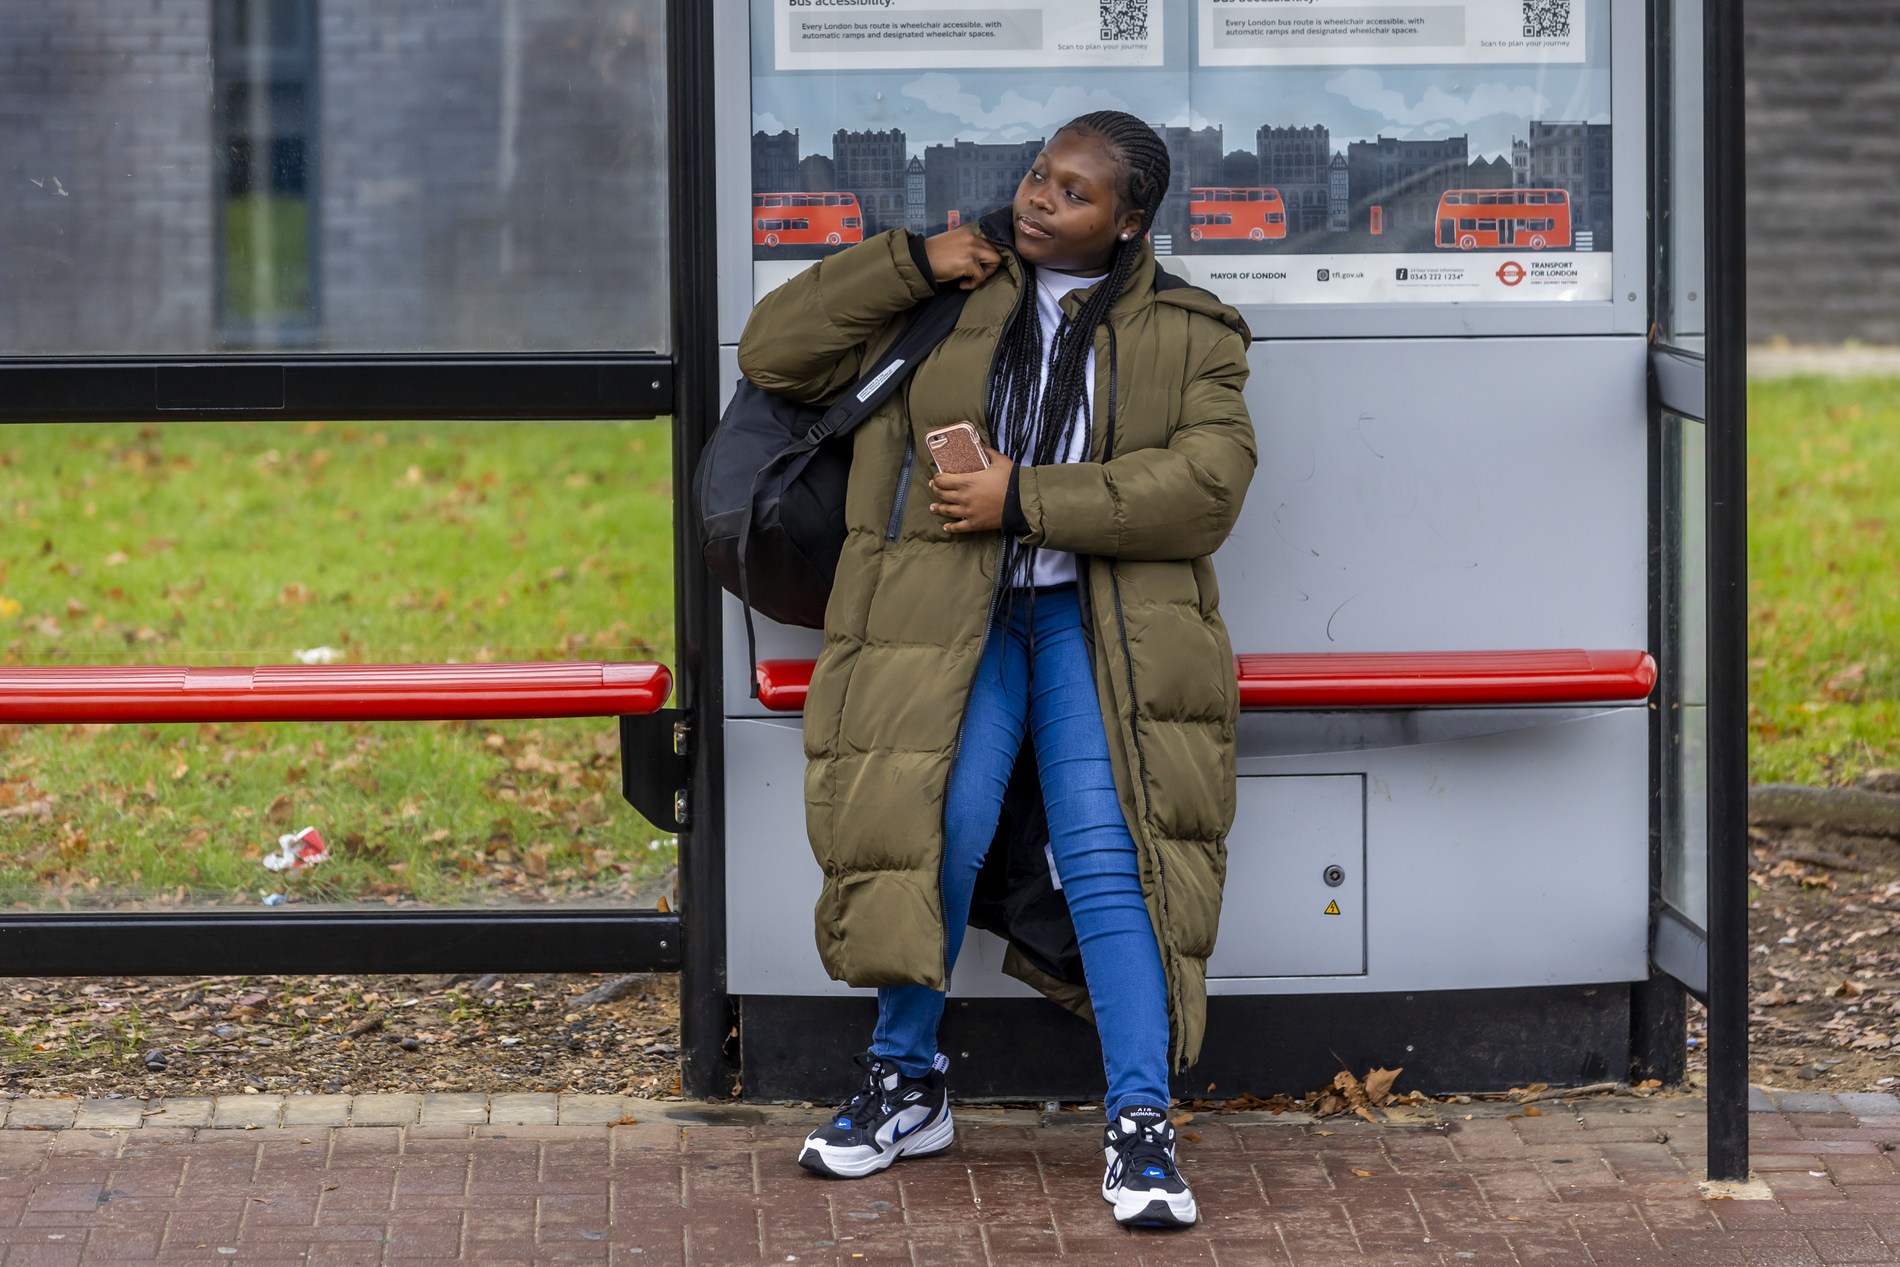 A young woman is standing at a bus stop. She is thinking about being kicked out of her house. This is a full-body image.